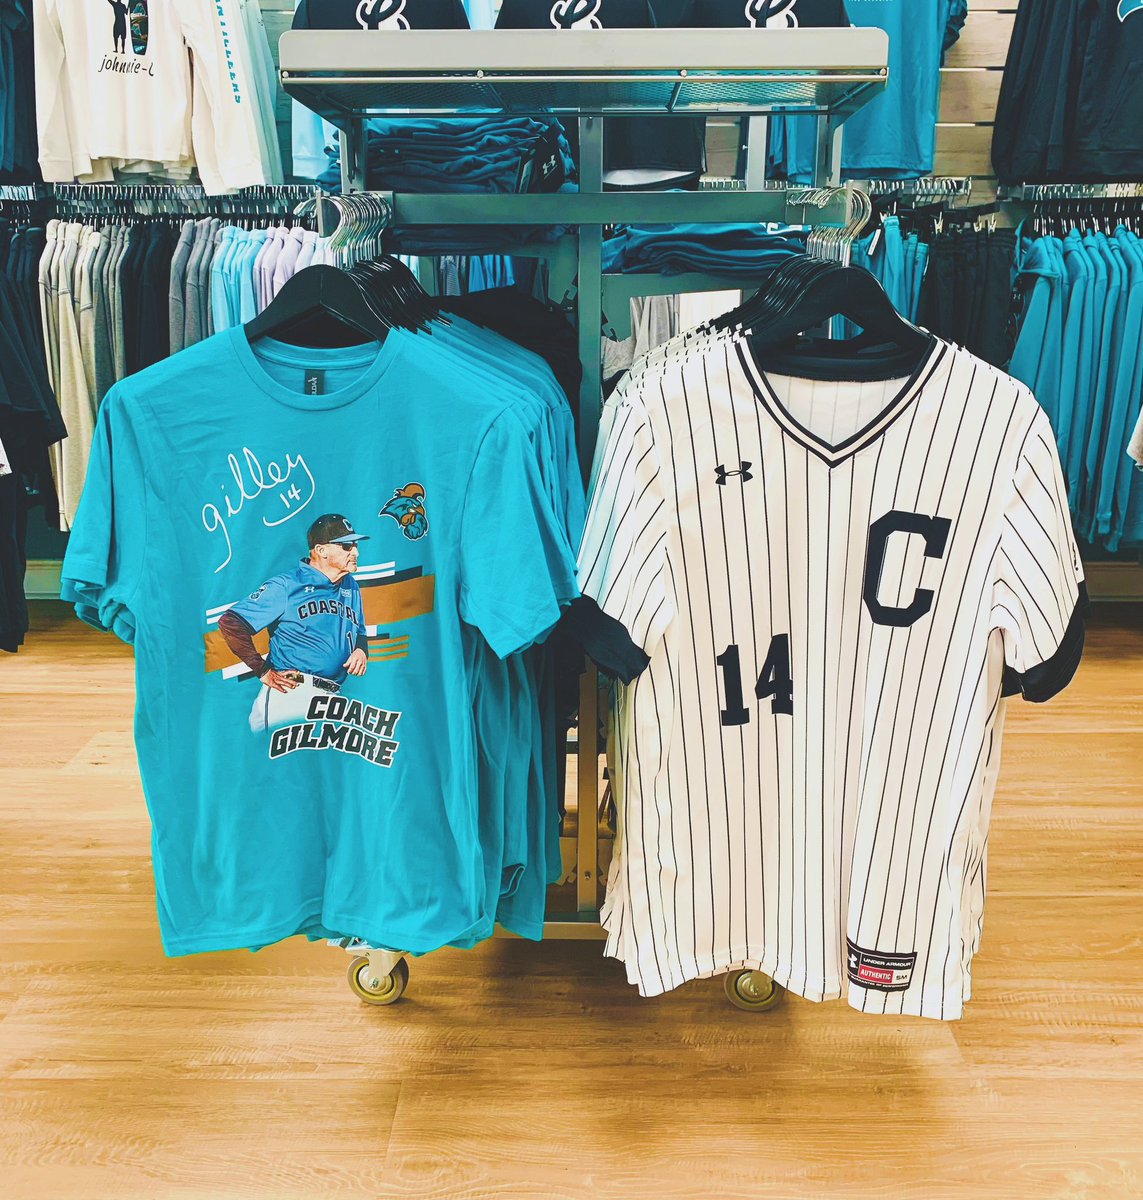 If you missed the chance to obtain Gilley merchandise that was sold on Saturday, THERE IS STILL TIME! Shop Teal Nation in Conway will have you covered 😎👍🏻 #ccusoon #changsup